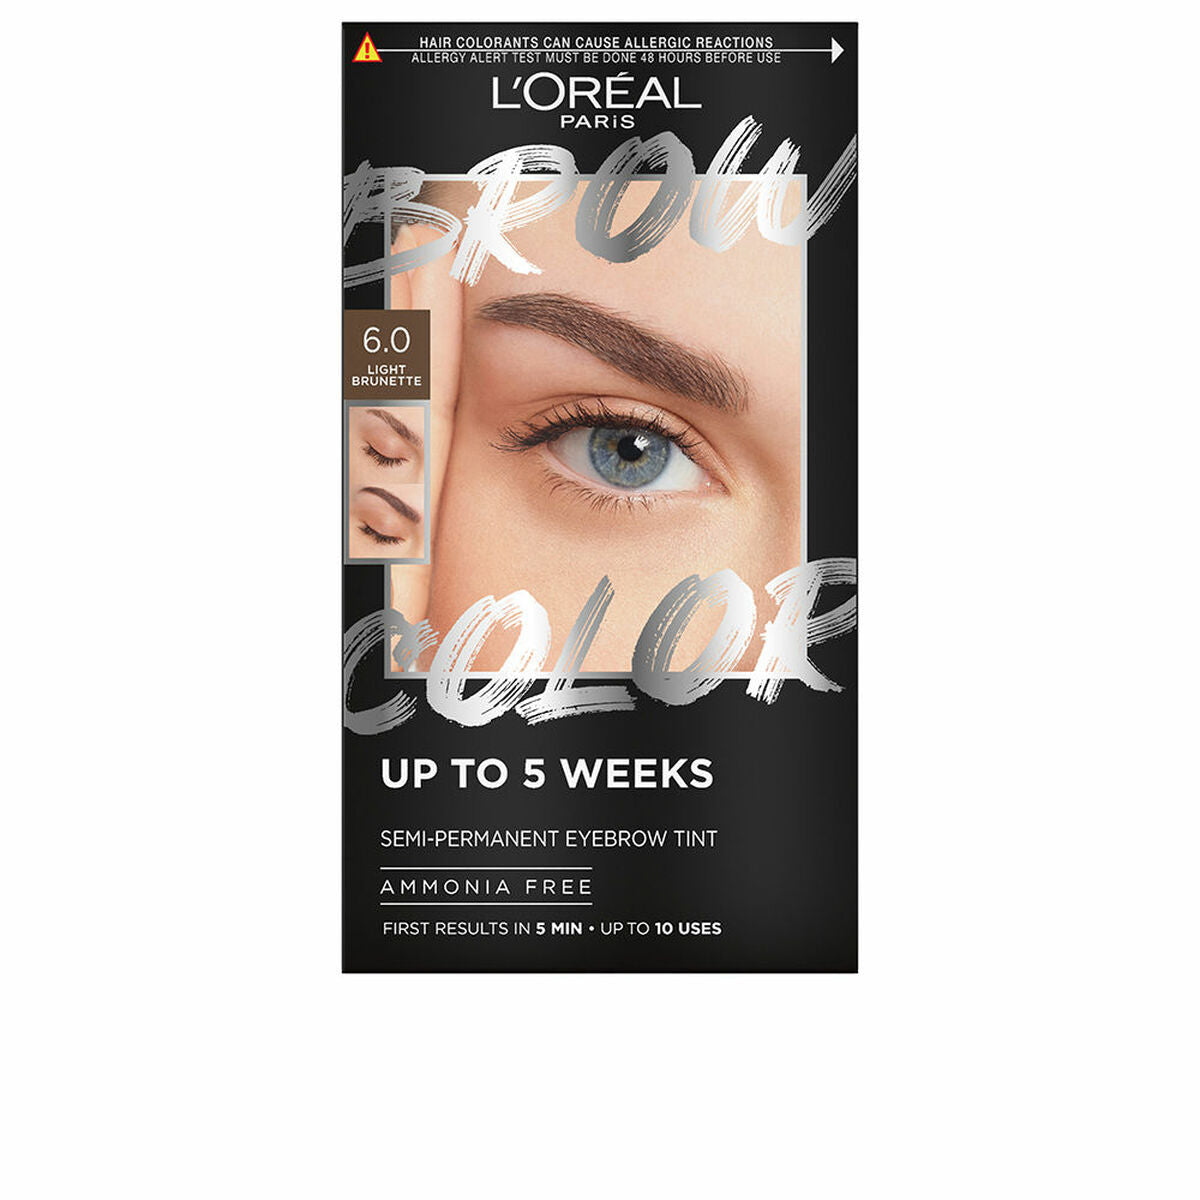 Eyebrow Tint L'Oreal Make Up BROW COLOR Nº 6.0 Light brunette Semi-permanent 4 Pieces